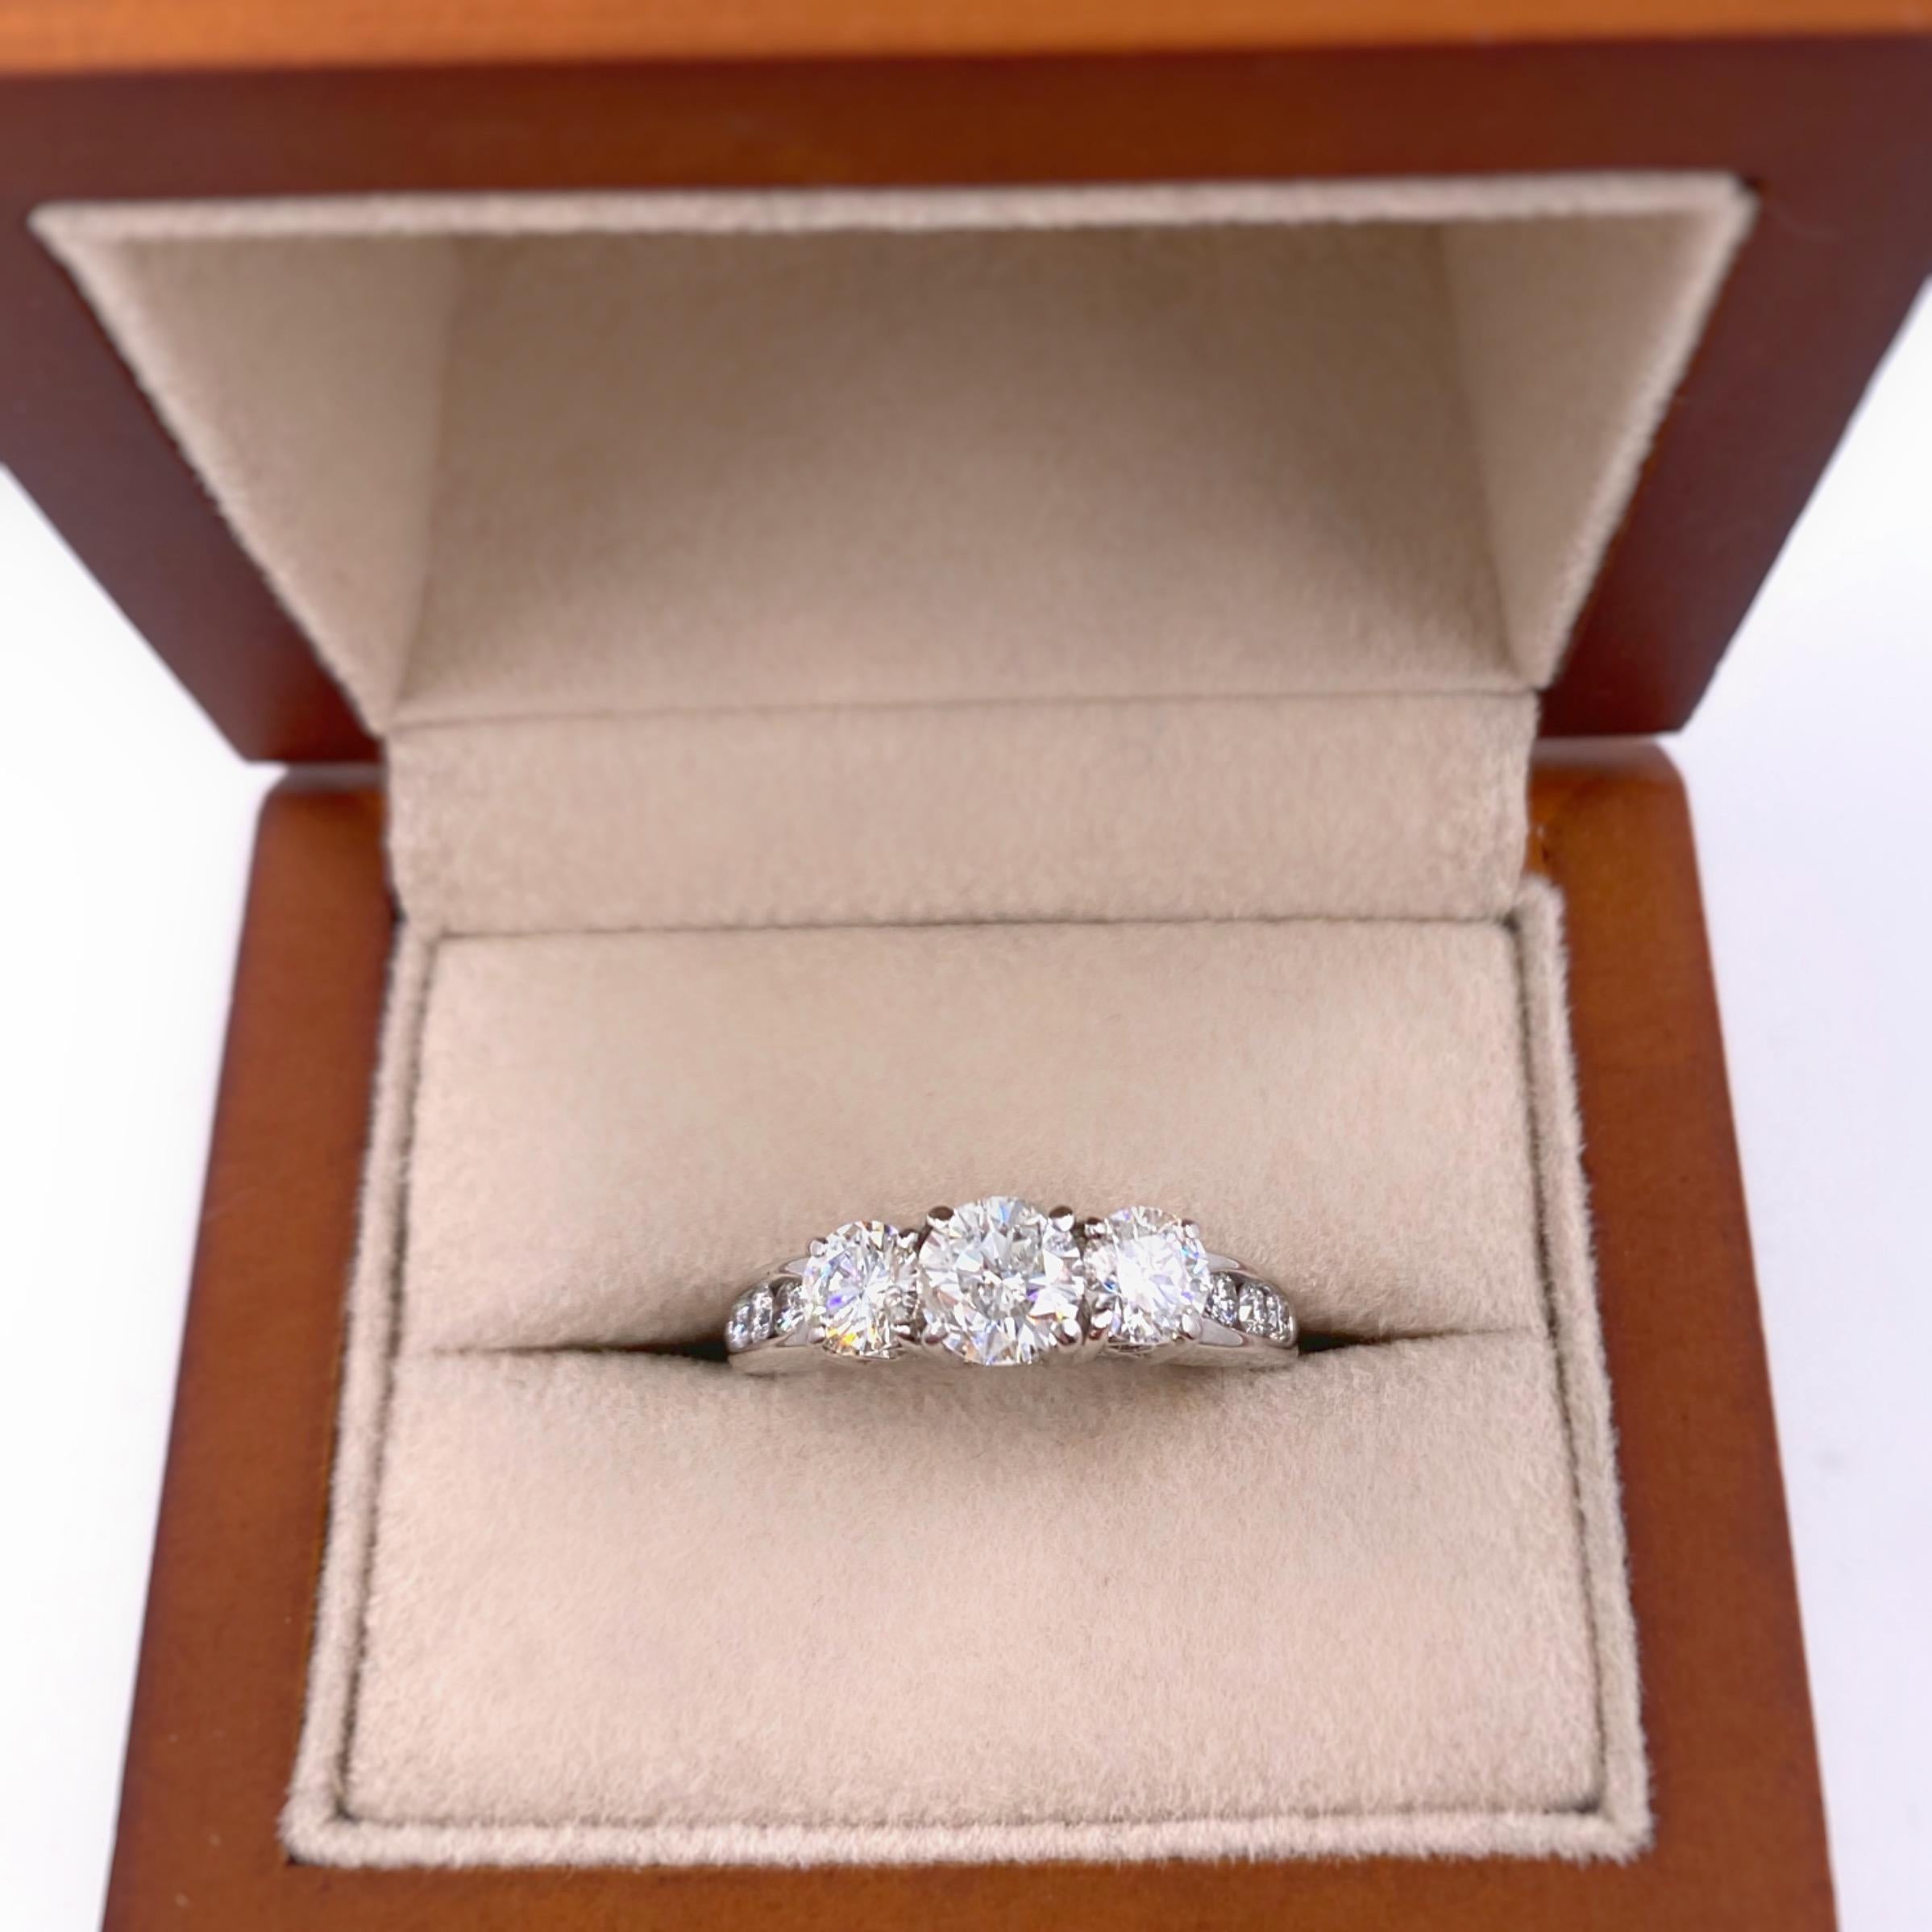 Three-Stone Diamond Engagement Ring
Style:  Past Present Future Engagement Ring
Metal:  14kt White Gold
Size:  6 - sizable
TCW:  1.40 tcw
Main Diamond:  Round Brilliant Diamond 0.60 cts
Color & Clarity:  G - H / SI2 - SI3
Accent Diamonds:  2 Round